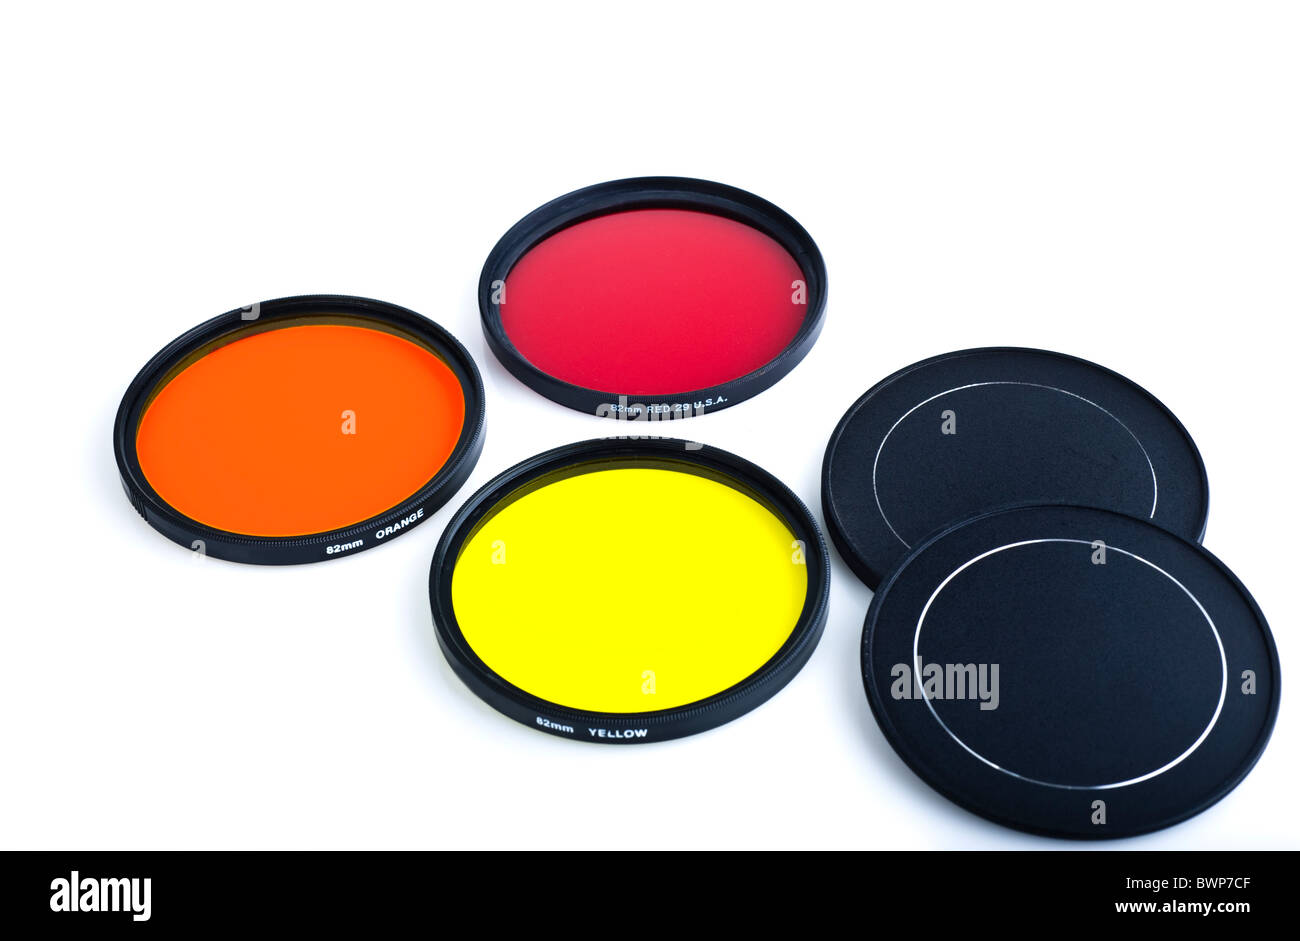 Red, yellow and orange lens filters for film cameras on a white background. Stock Photo